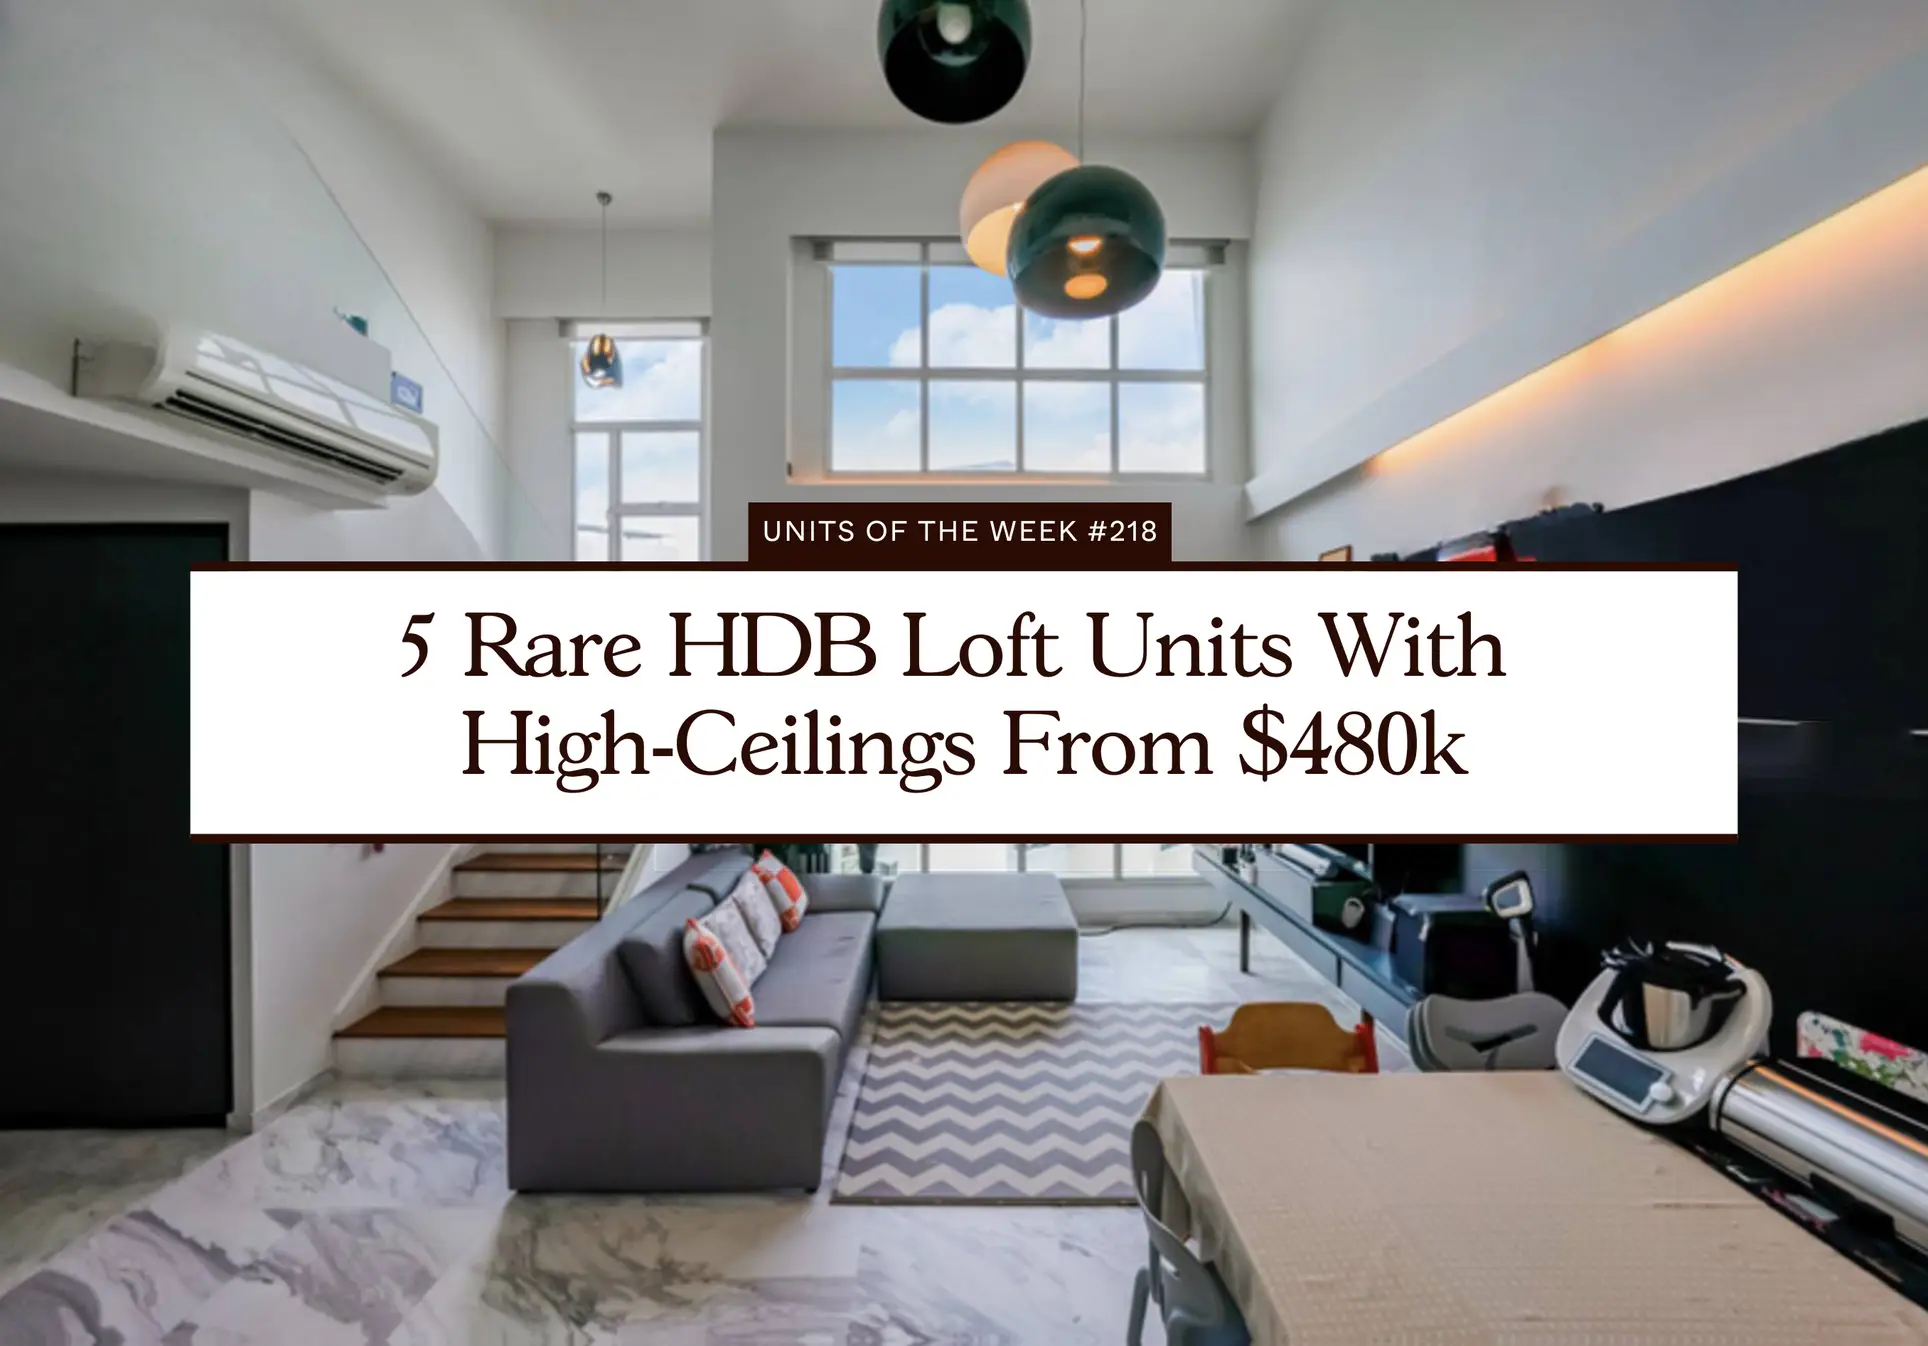 5 Rare HDB Loft Units With High Ceilings From 480k